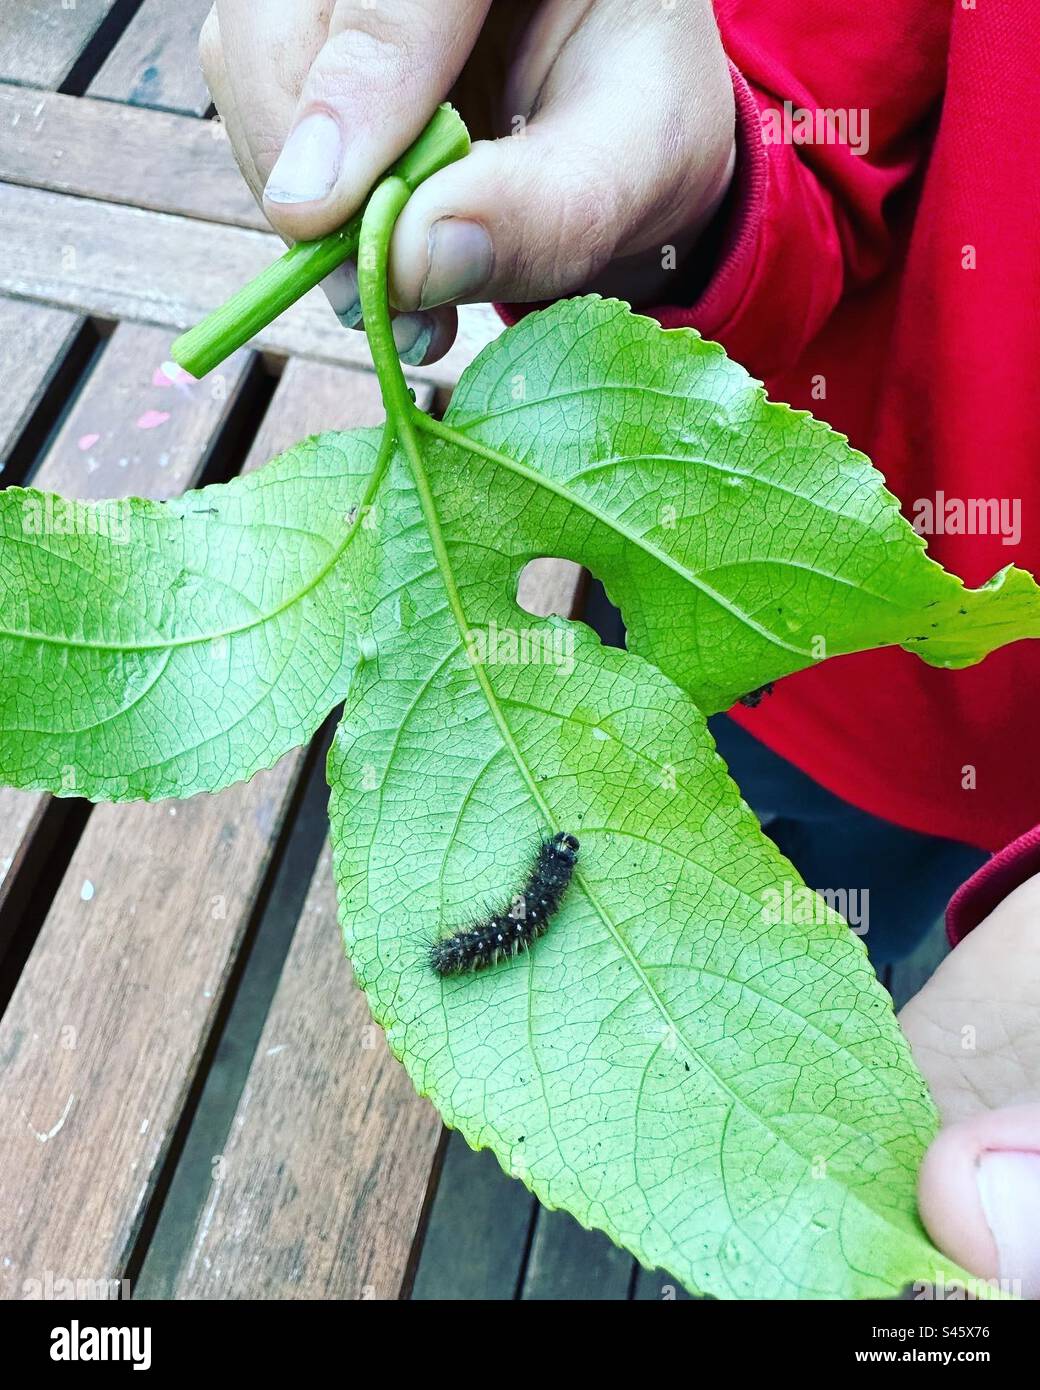 Caterpillar on a leaf held by a child Stock Photo